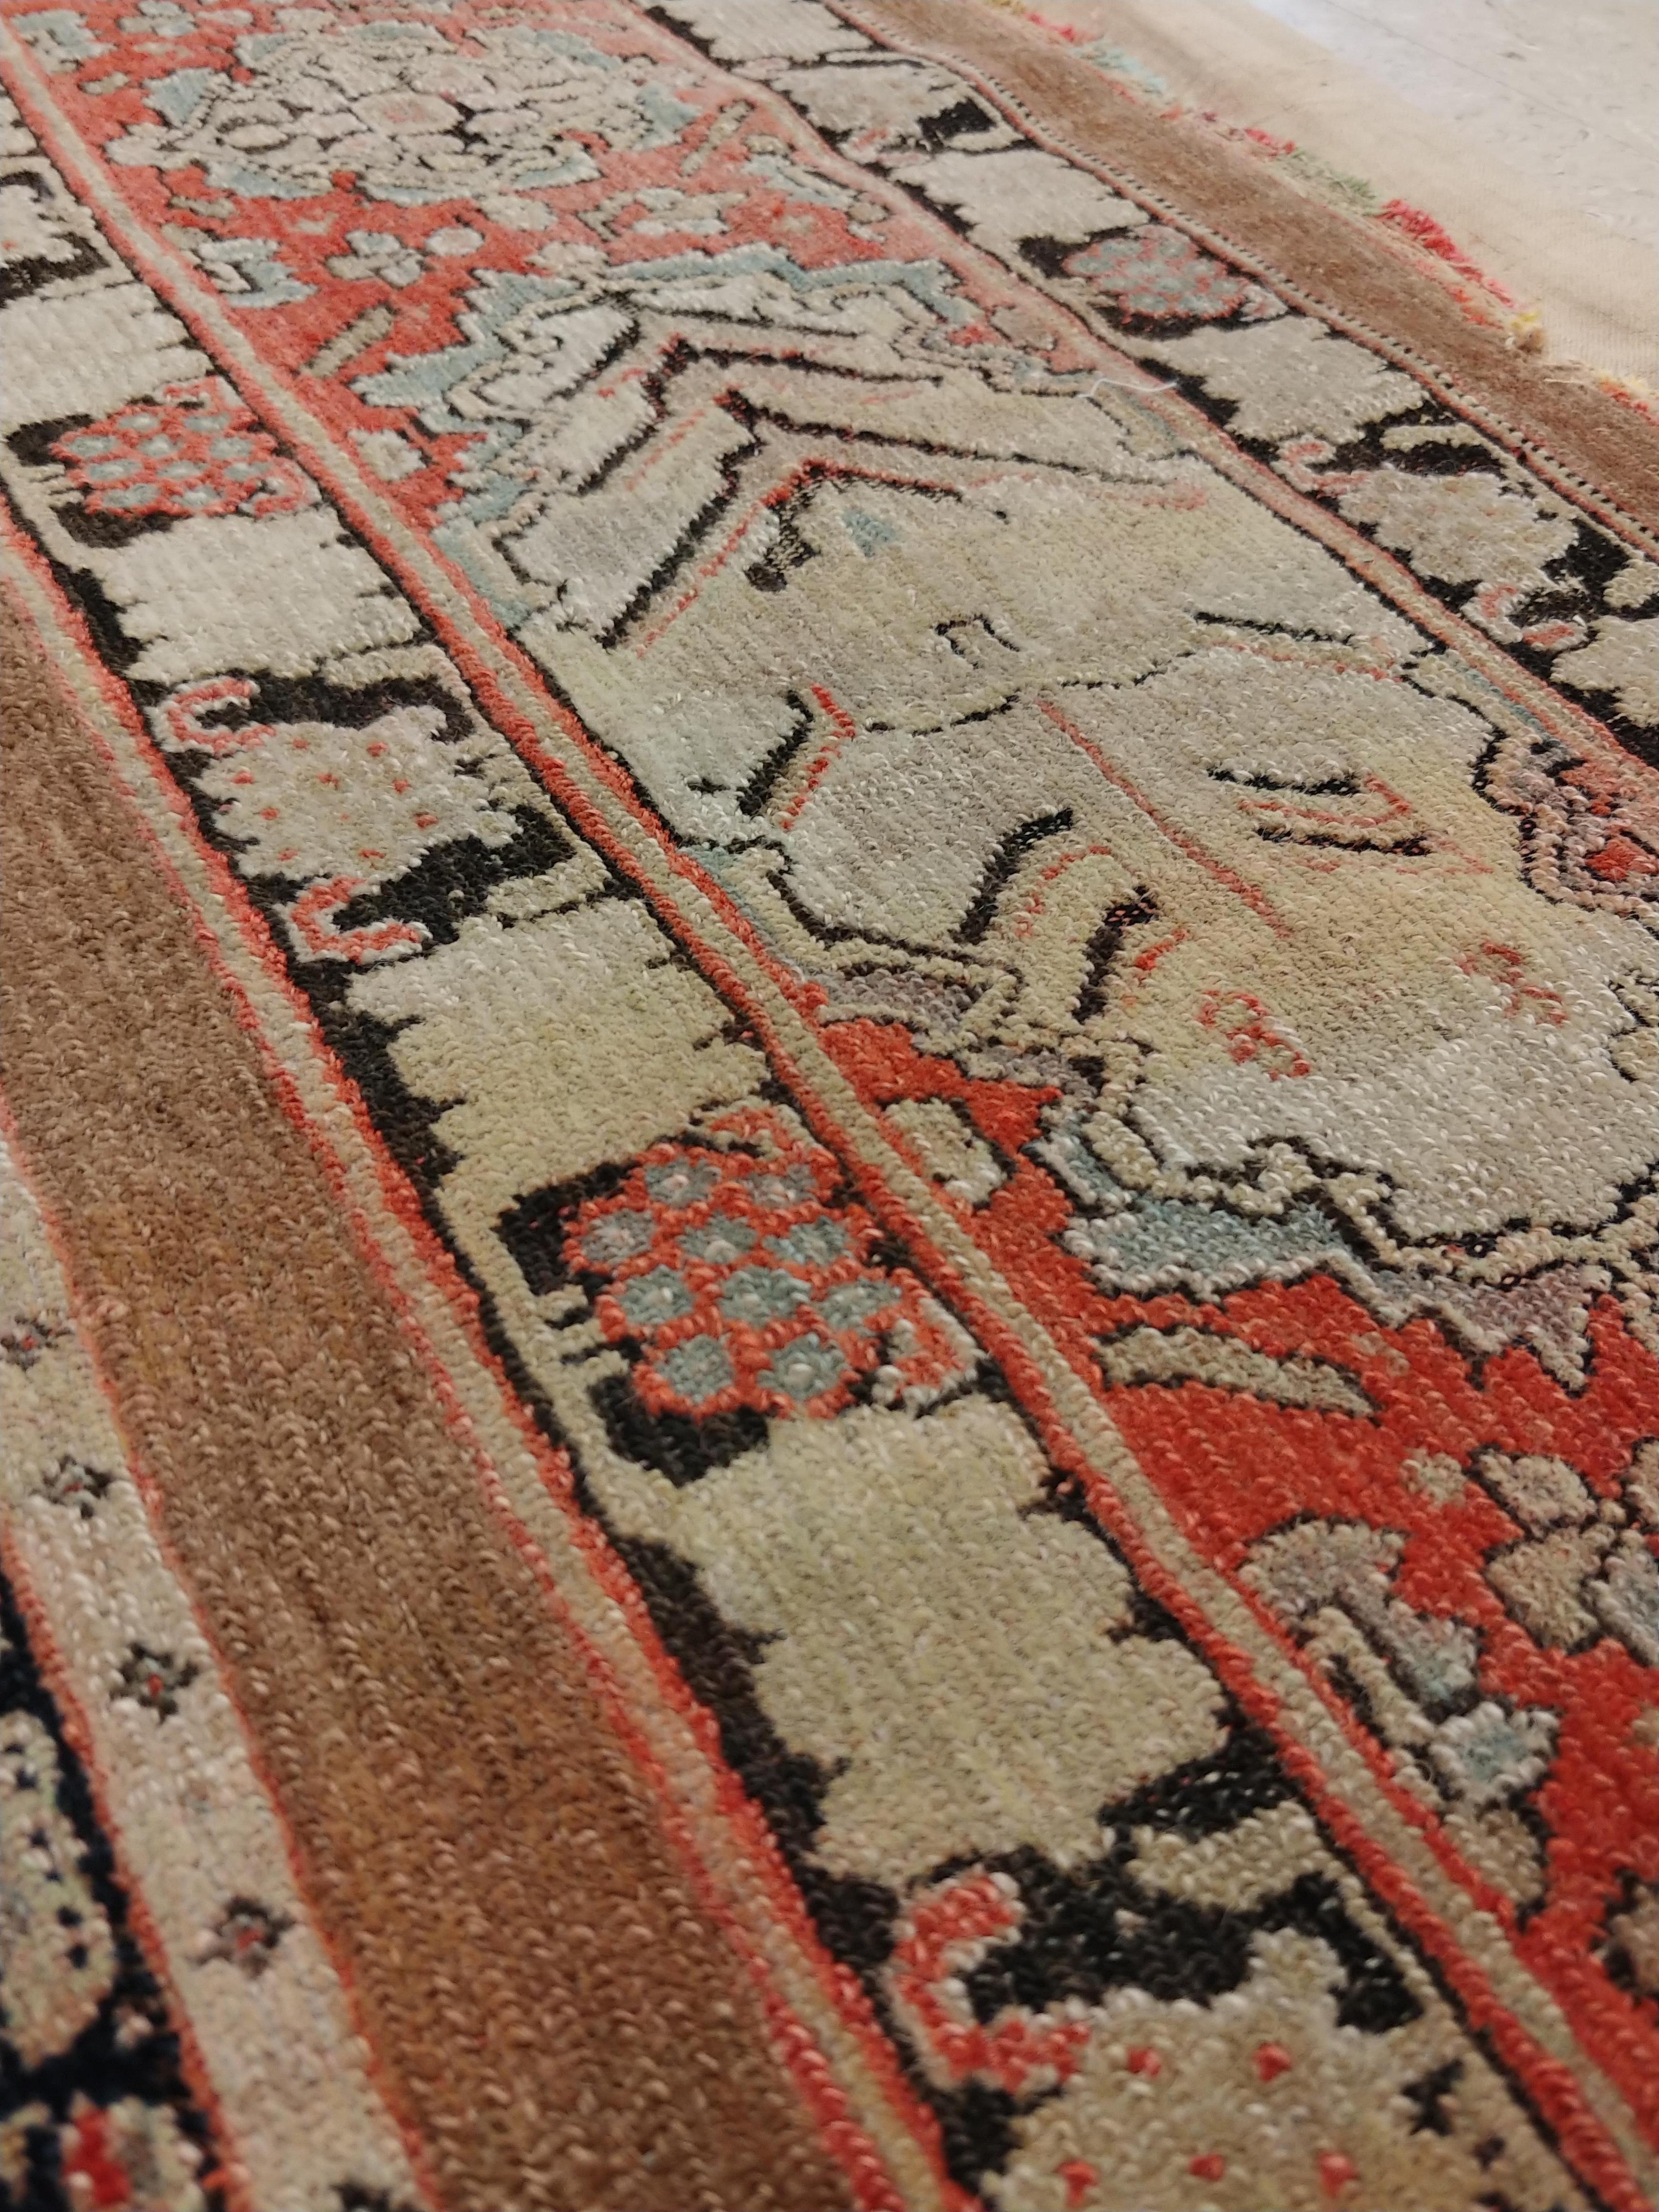 Antique Senneh Rug with Silk Warp, Handmade, Fine Ivory, Red, Brown, Ivory, Teal In Good Condition For Sale In Port Washington, NY